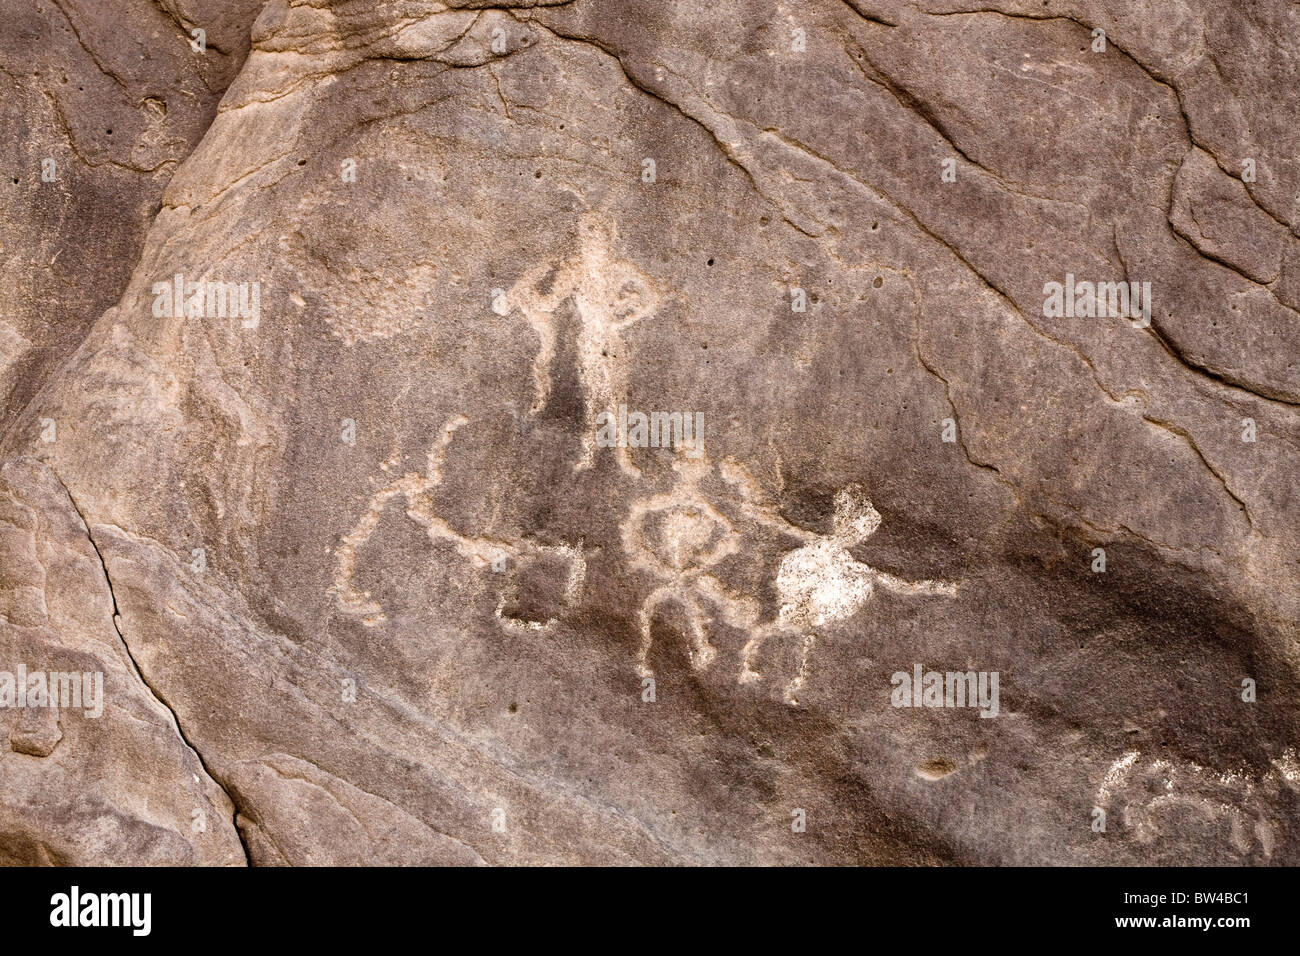 depictions of men and animals on rock in Eastern Desert of Egypt Stock Photo